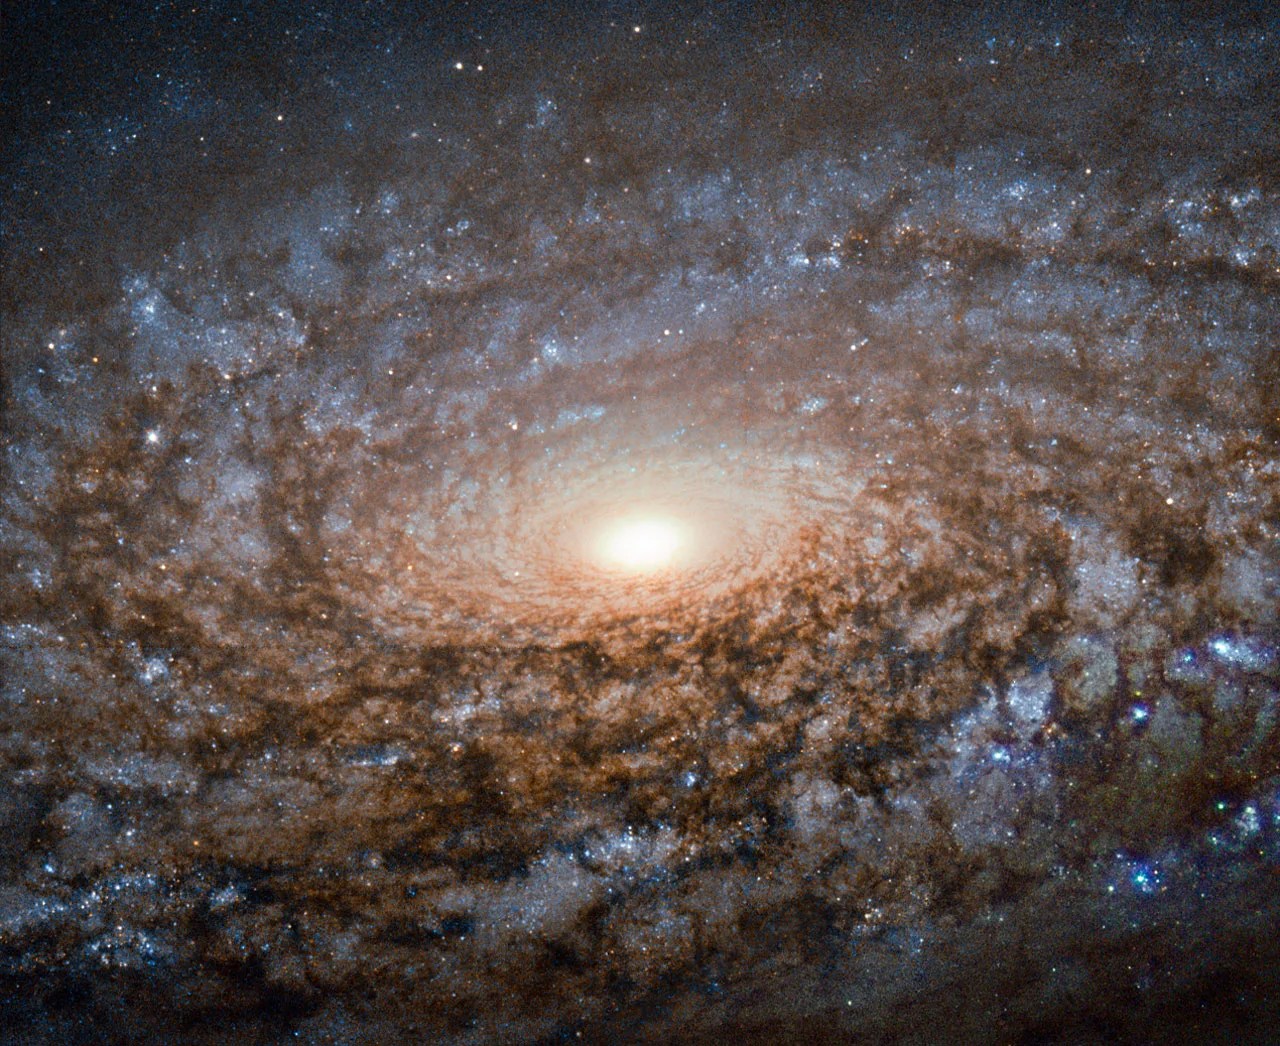 Spiral galaxy ngc 3521 has a soft, woolly appearance